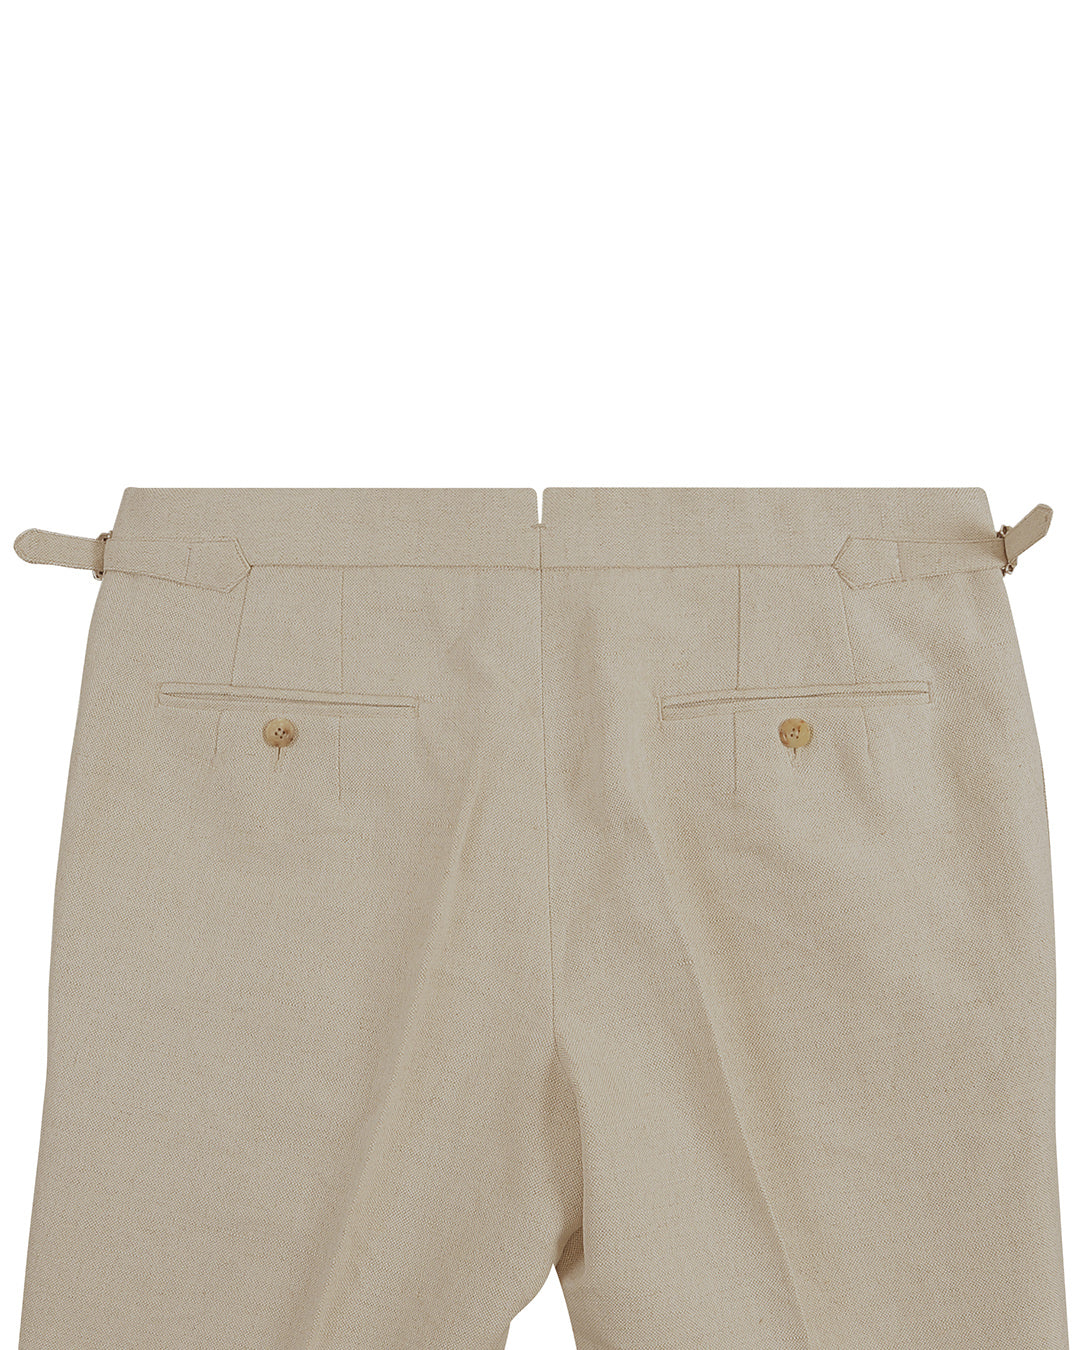 Back view of custom linen canvas pants for men by Luxire in jute brown